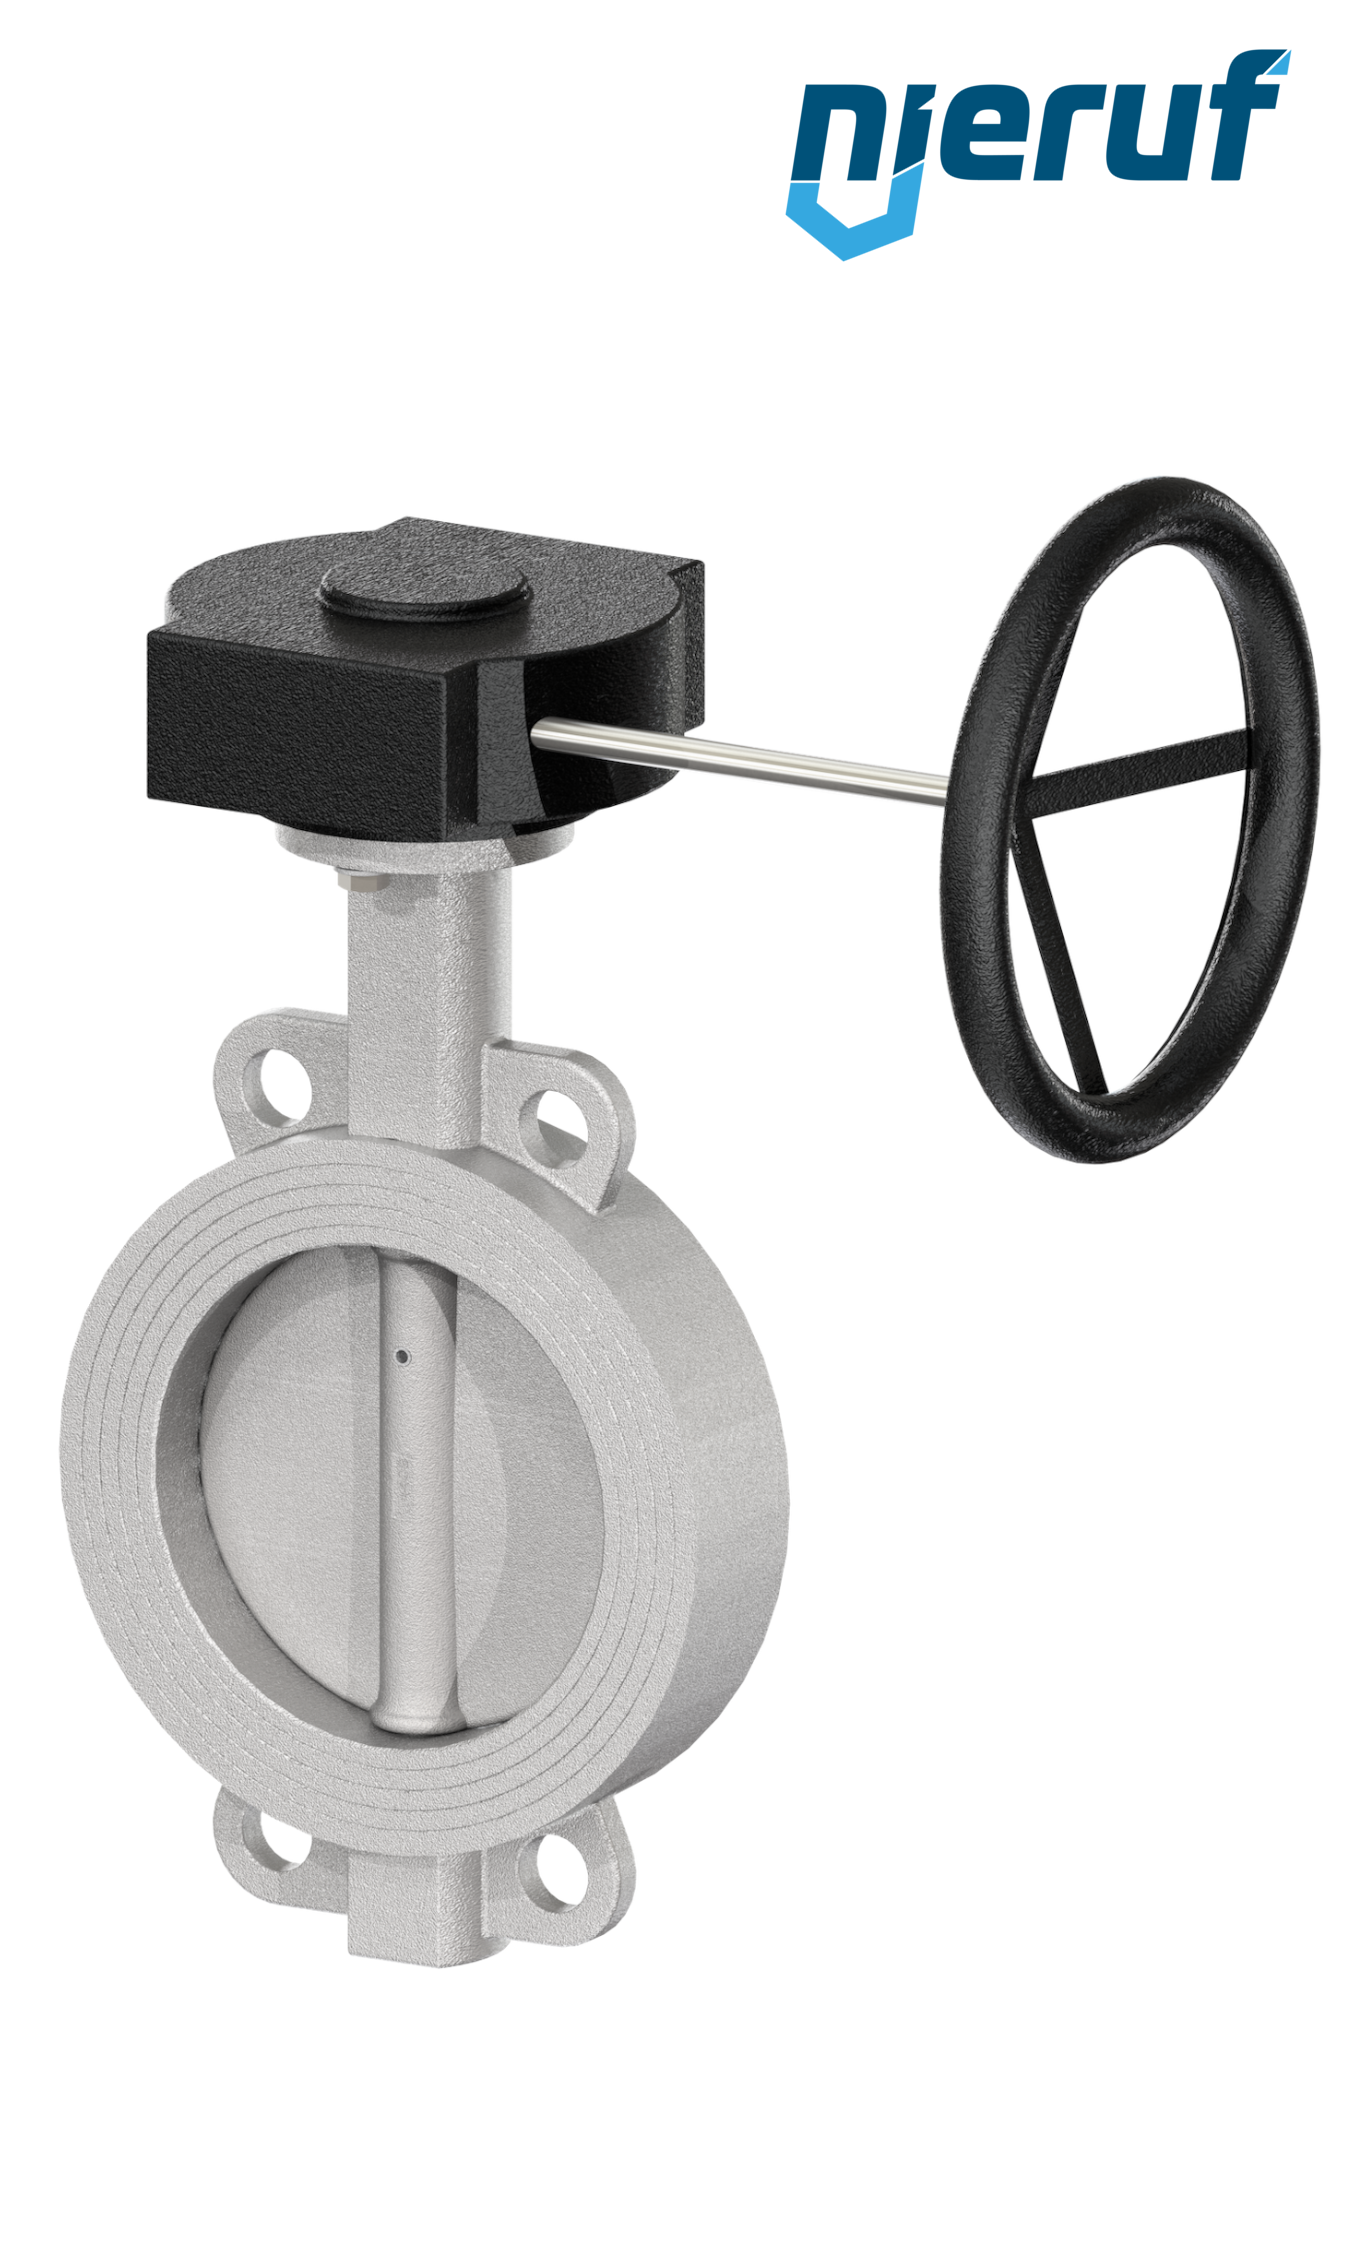 Butterfly-valve-stainless-steel DN 125 PN16 AK08 metall gearbox